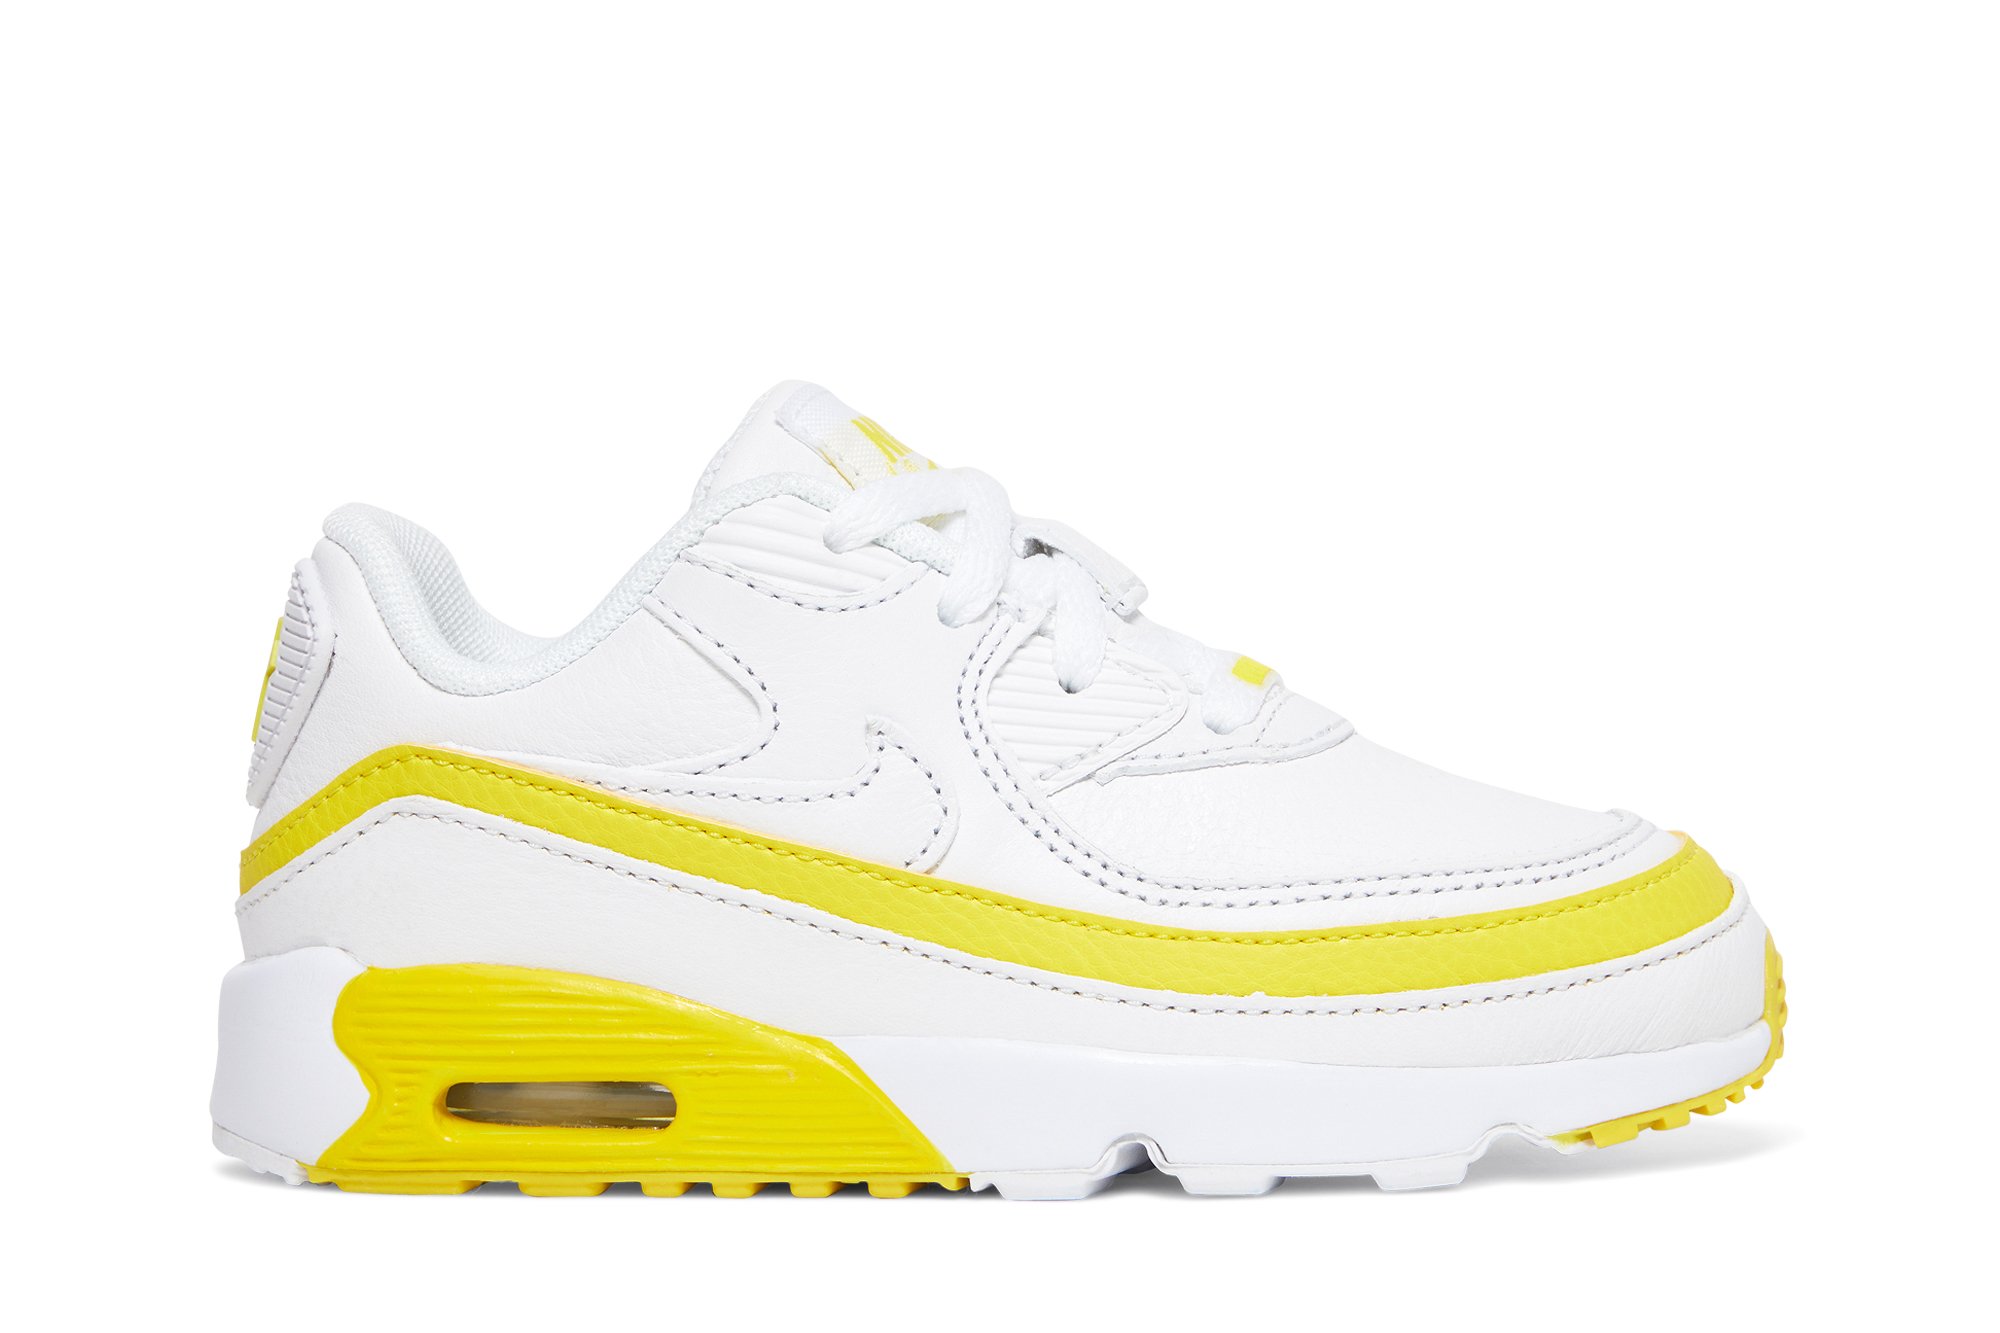 Buy Undefeated x Air Max 90 BT 'White Optic Yellow' - CQ4615 101